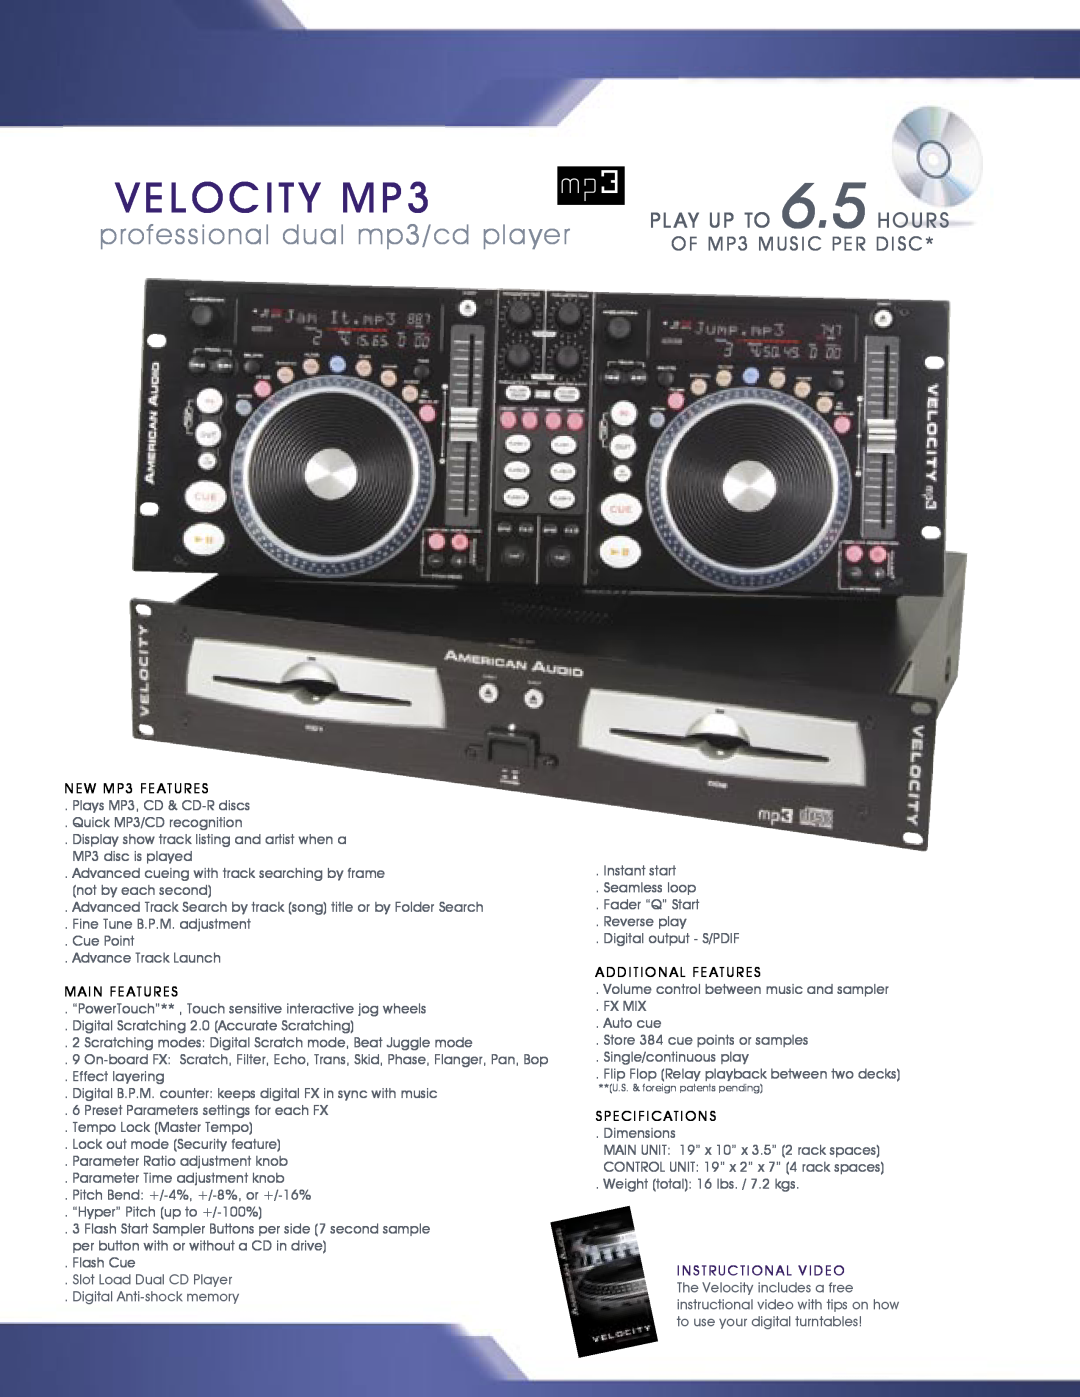 American Audio MCD-810 VELOCITY MP3, professional dual mp3/cd player, PL AY UP TO 6.5 HOURS, OF MP3 MUSIC PER DISC 